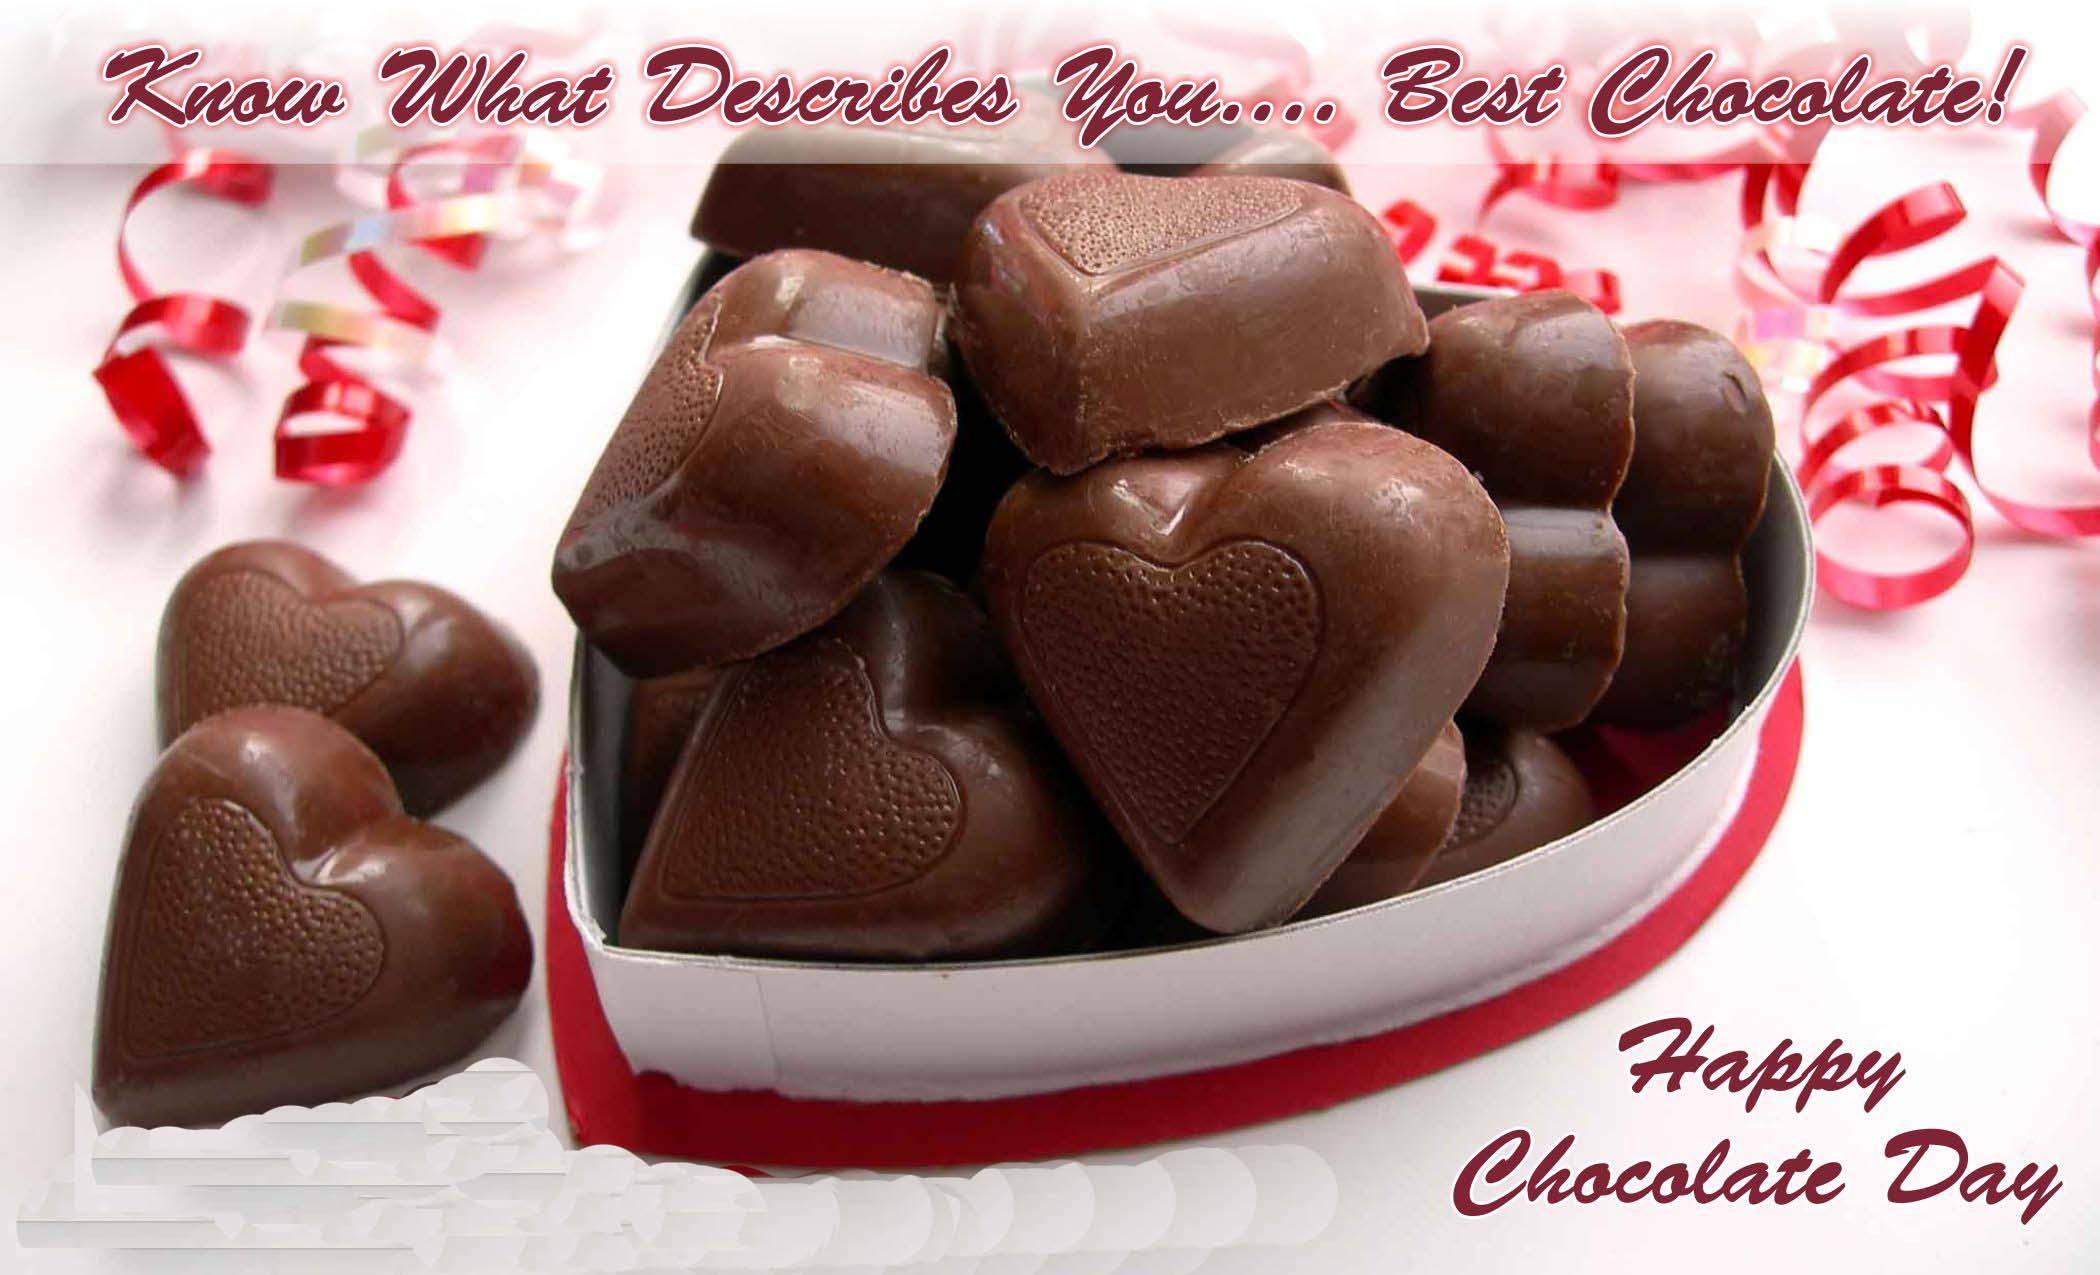 Chocolate Day Image for Whatsapp DP, Profile Wallpaper